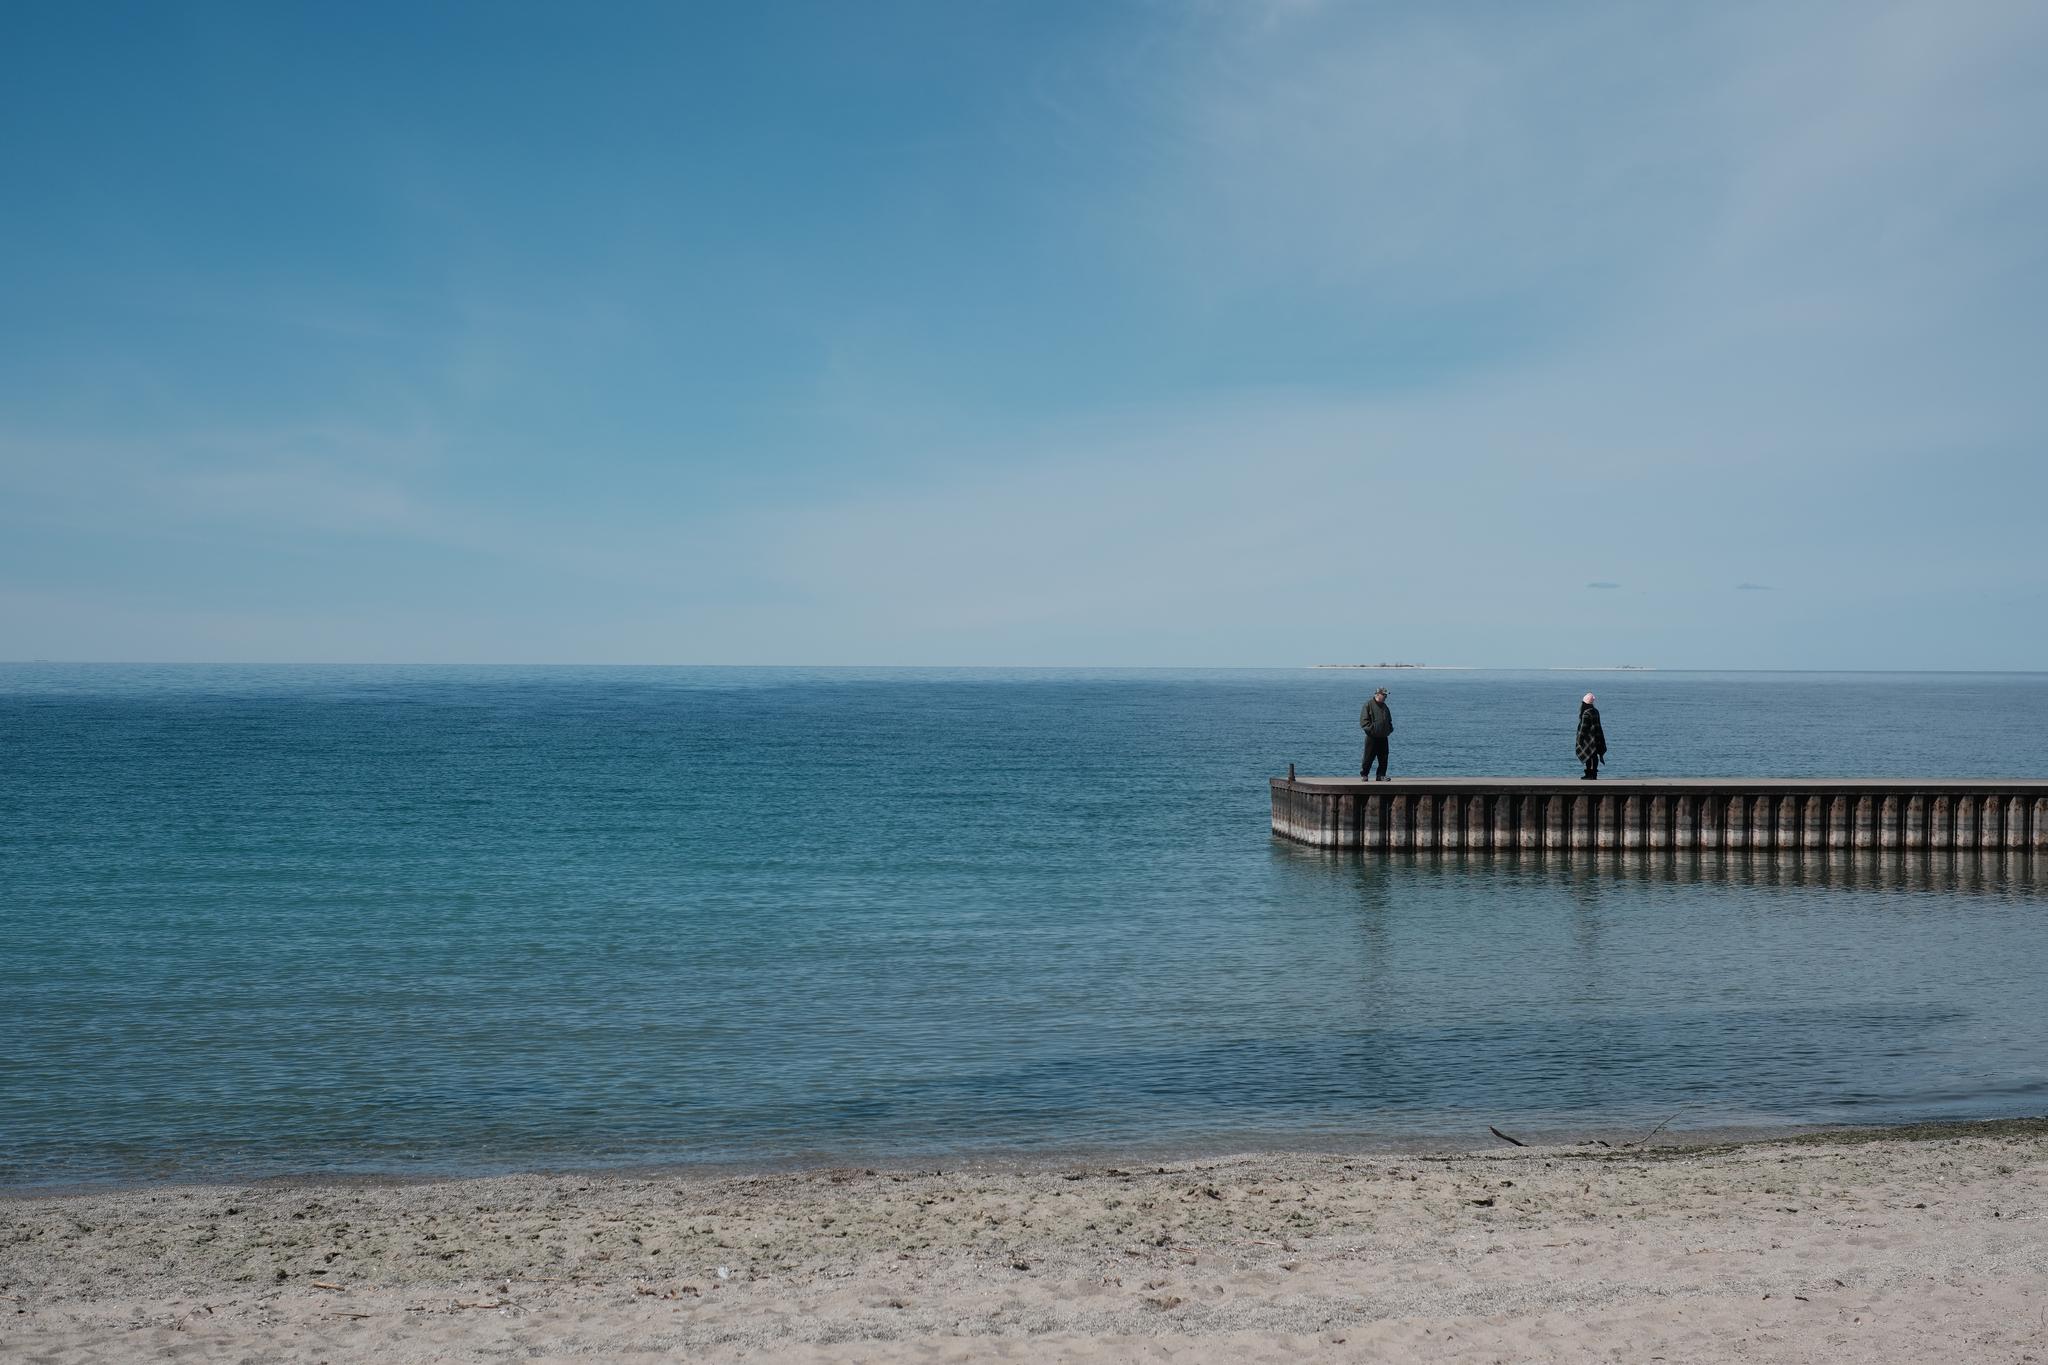 A serene beach with a clear blue sky, calm sea, and two figures standing at the end of a wooden jetty